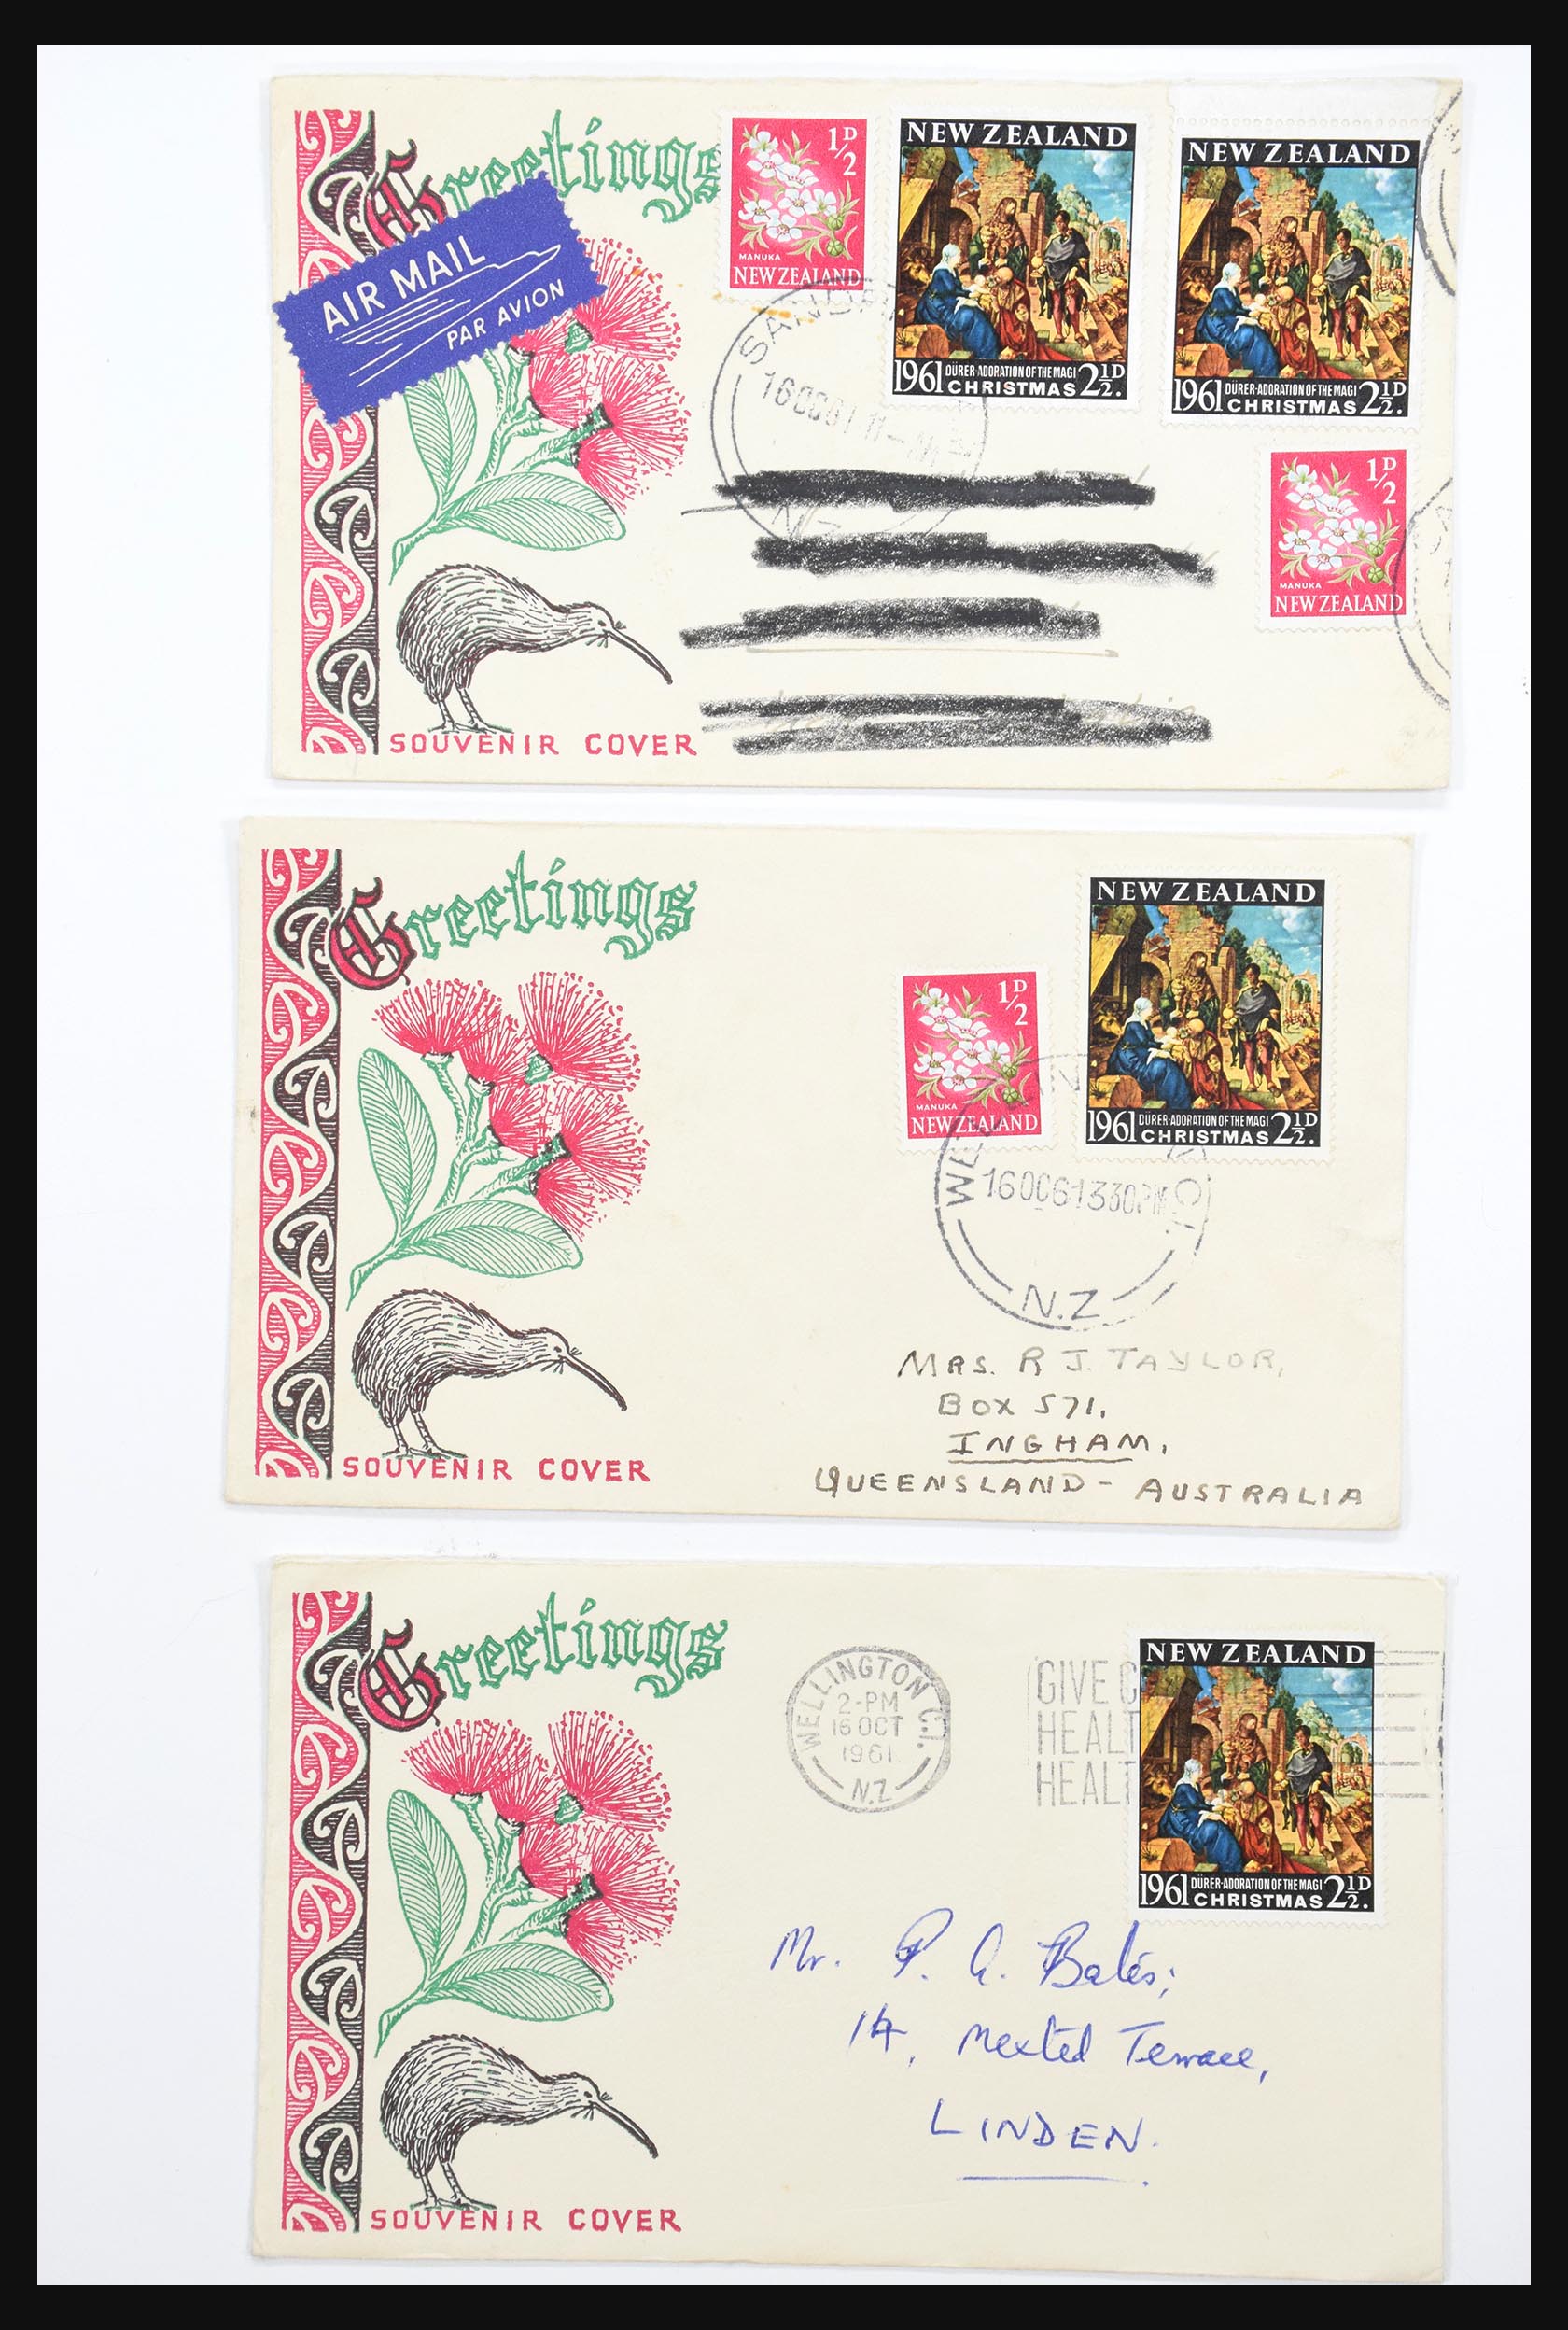 30821 028 - 30821 New Zealand FDC's 1960-1971.